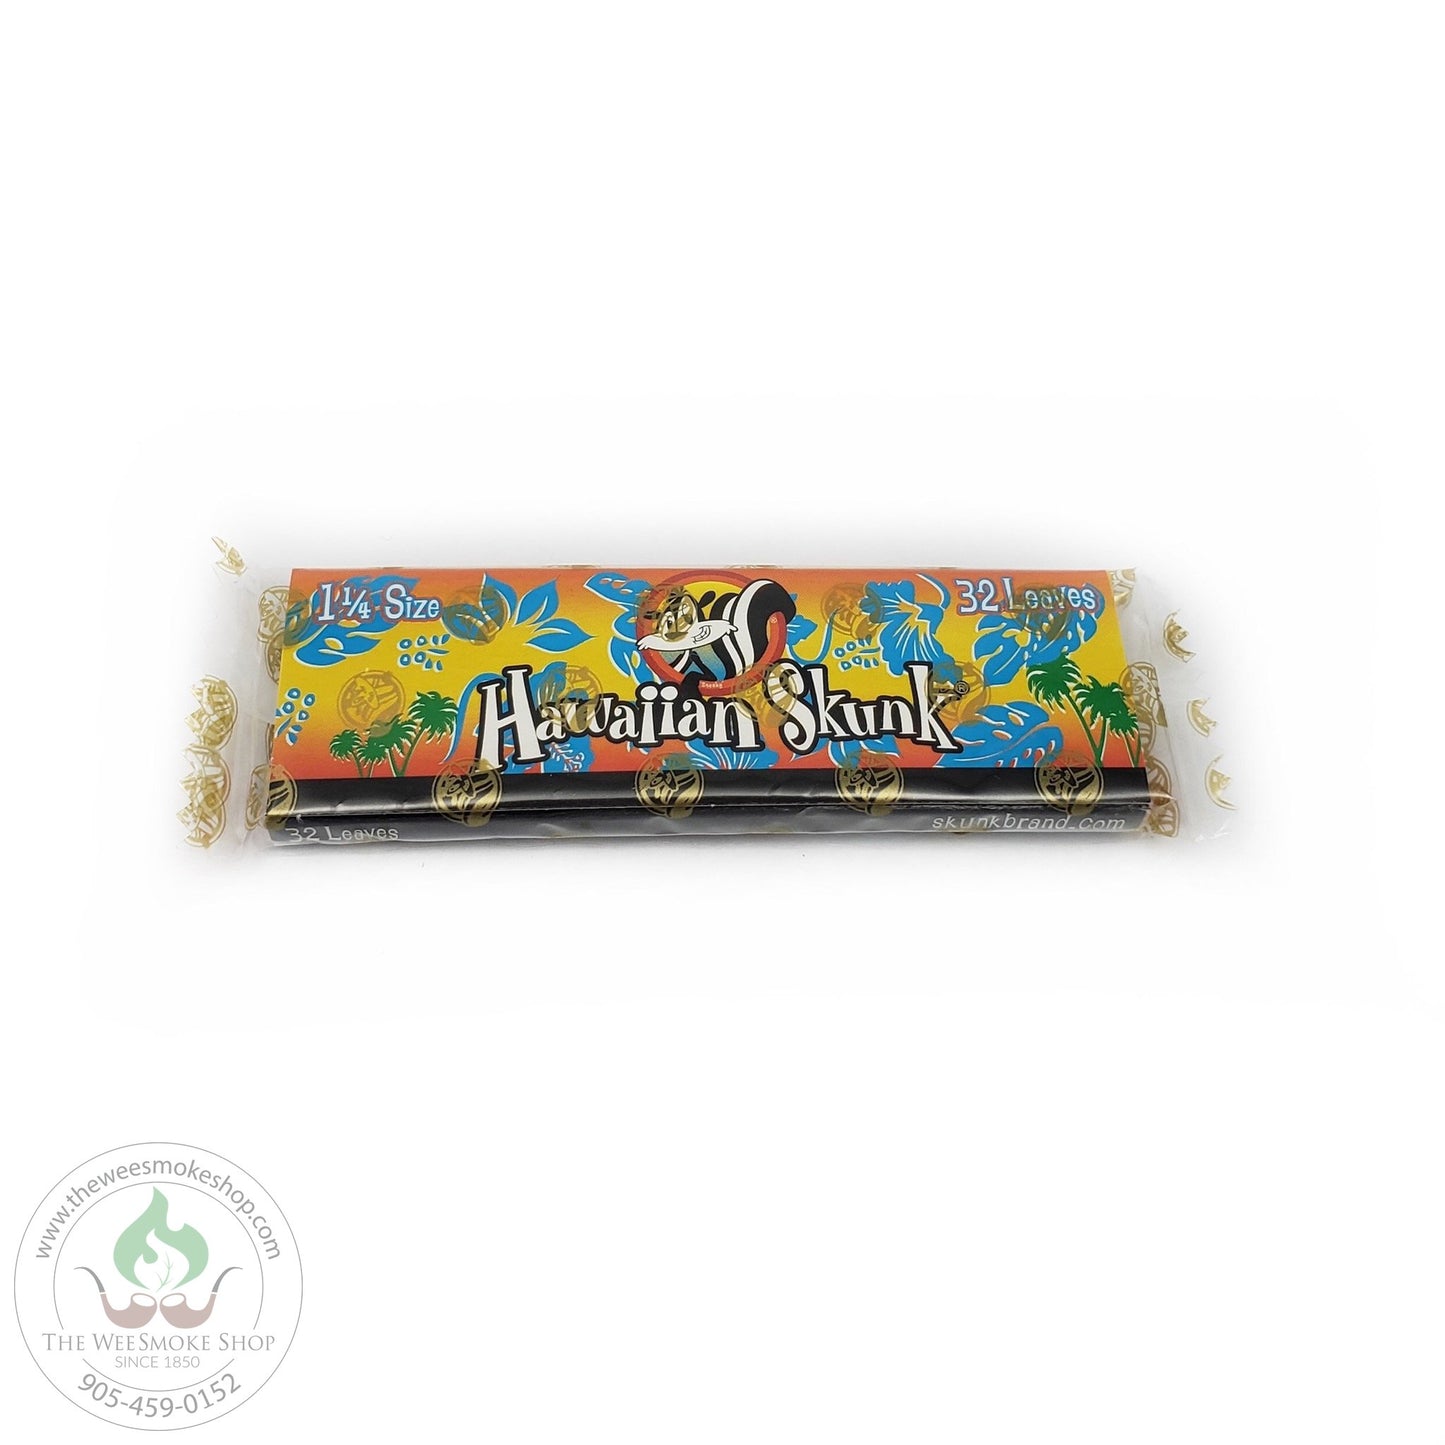 Skunk Brand 1 1/4 Size Flavoured Papers. Hawaiian. 32 leaves per pack. The Wee Smoke Shop